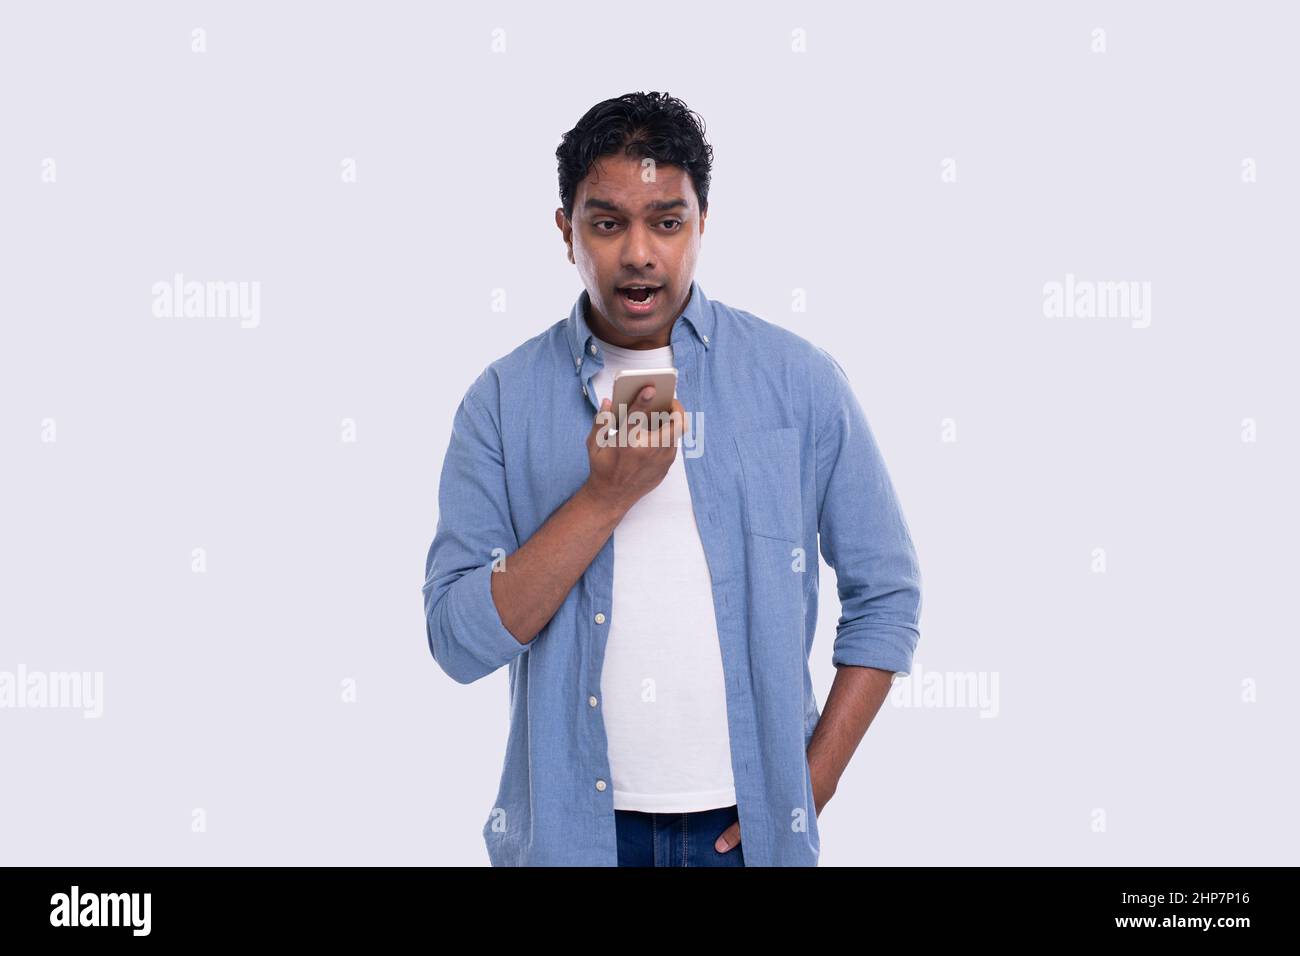 Indian Man Talking on Phone Standing Isolated. Angry Man Loudly speaking on Phone Commecial, Shopping, Advertisment Concept. Technology Stock Photo